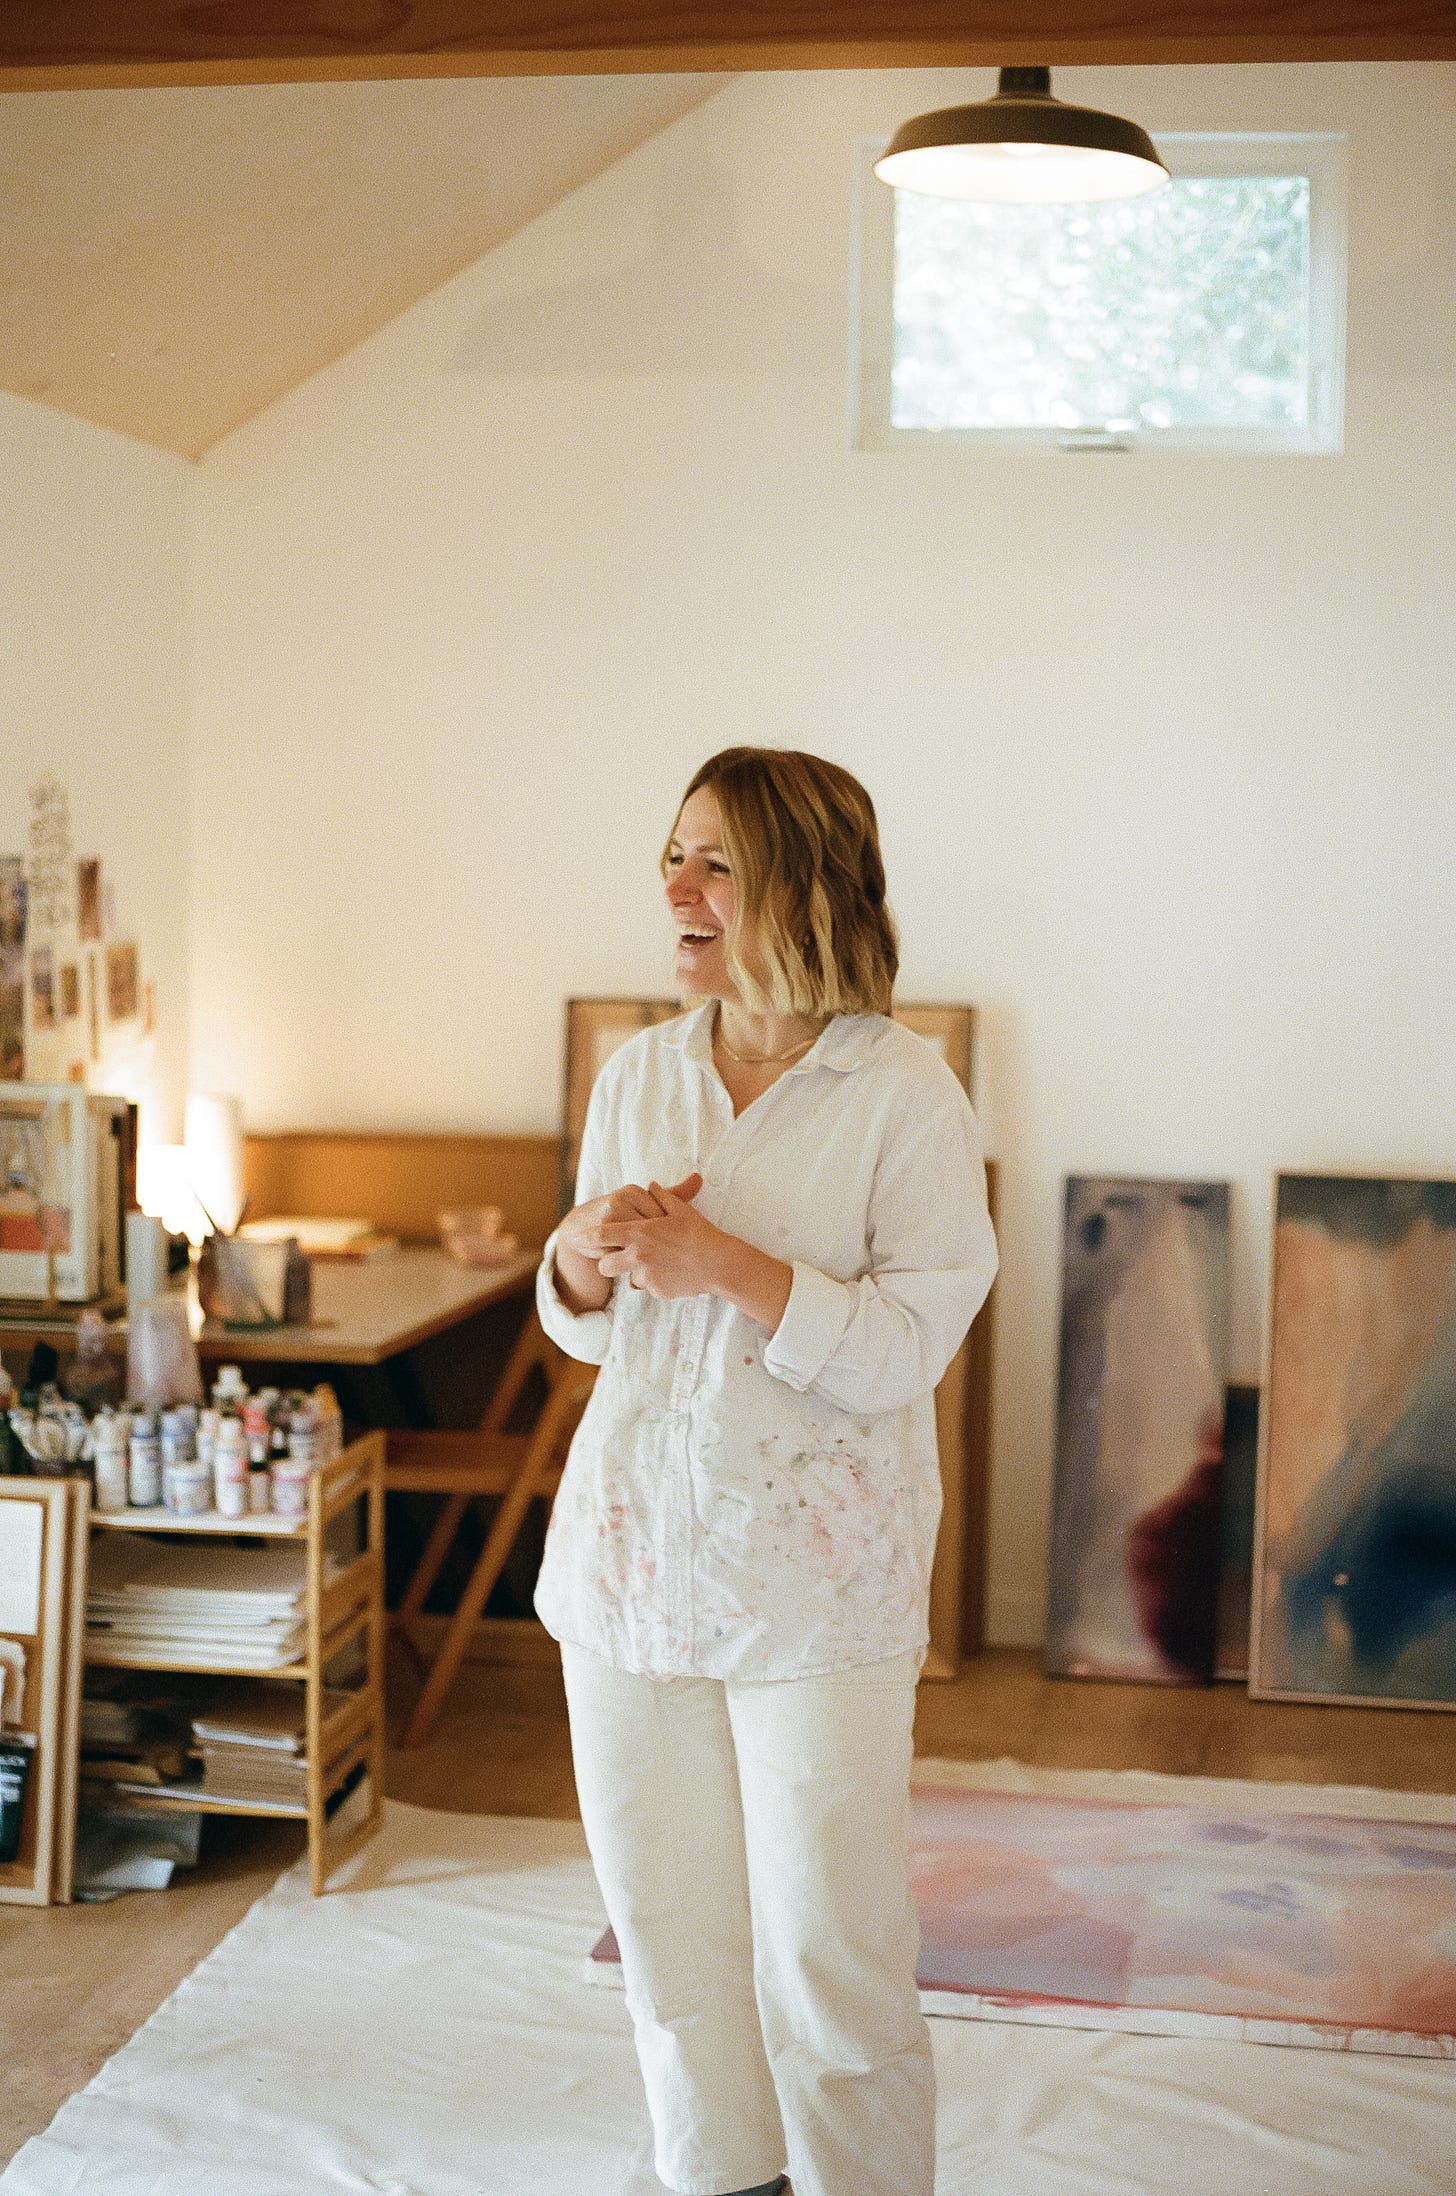 abstract artist Brenna Hodges in her home studio in Portland, Oregon